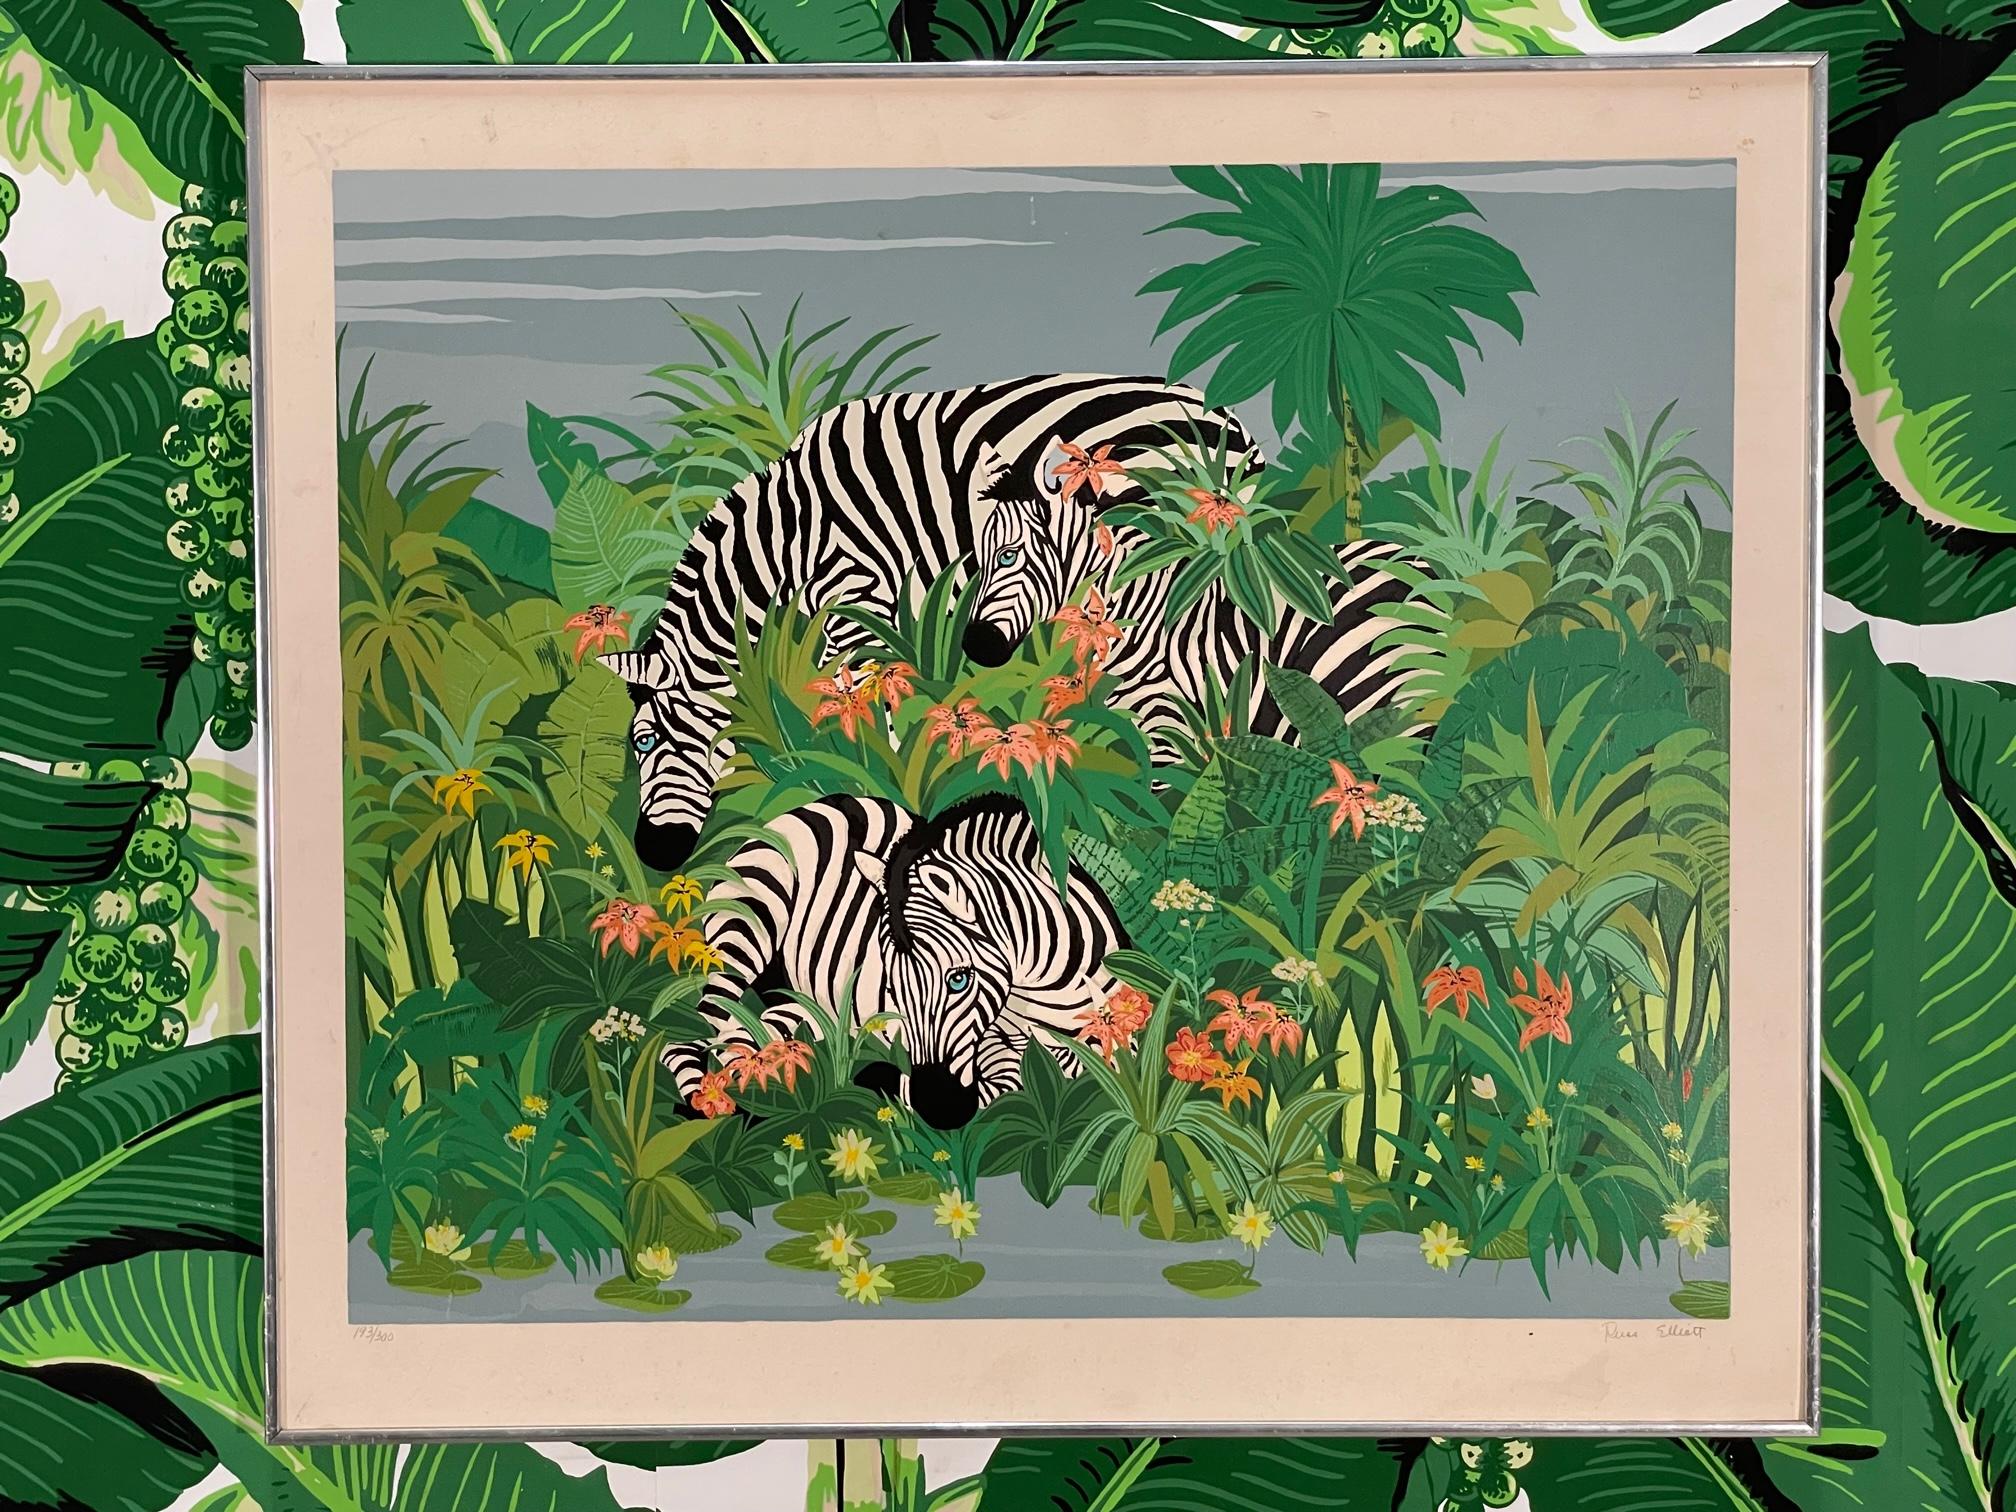 Colorful matted floral print features zebras and a metal frame. No glass. Good condition with imperfections consistent with age. May exhibit scuffs, marks, or wear, see photos for details.
 
 